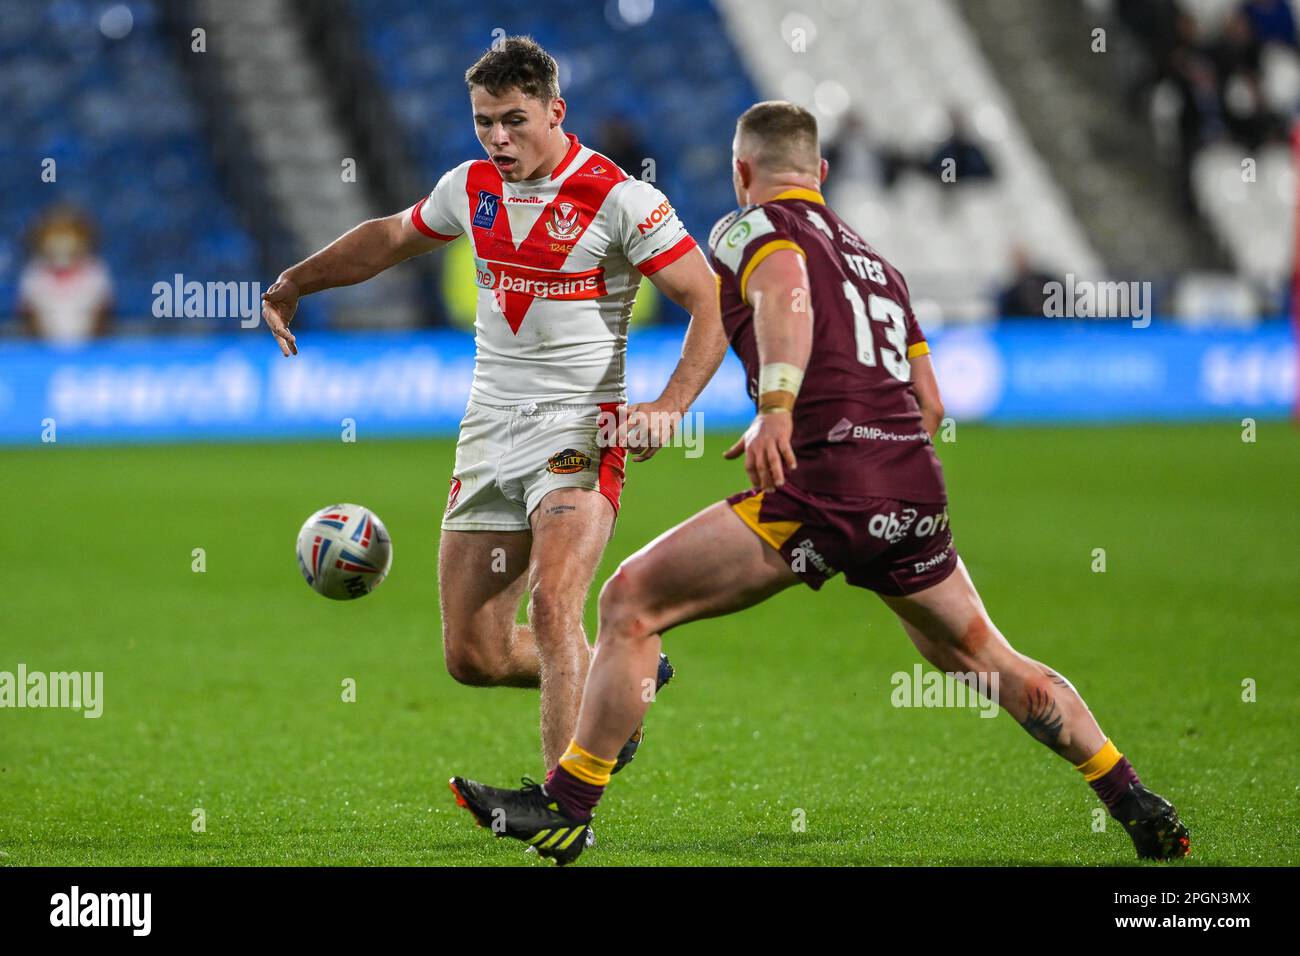 Jack Welsby #1 of St Helens chips ahead during the Betfred Super League Round 6 match Huddersfield Giants vs St Helens at John Smith's Stadium, Huddersfield, United Kingdom, 23rd March 2023  (Photo by Craig Thomas/News Images) Stock Photo